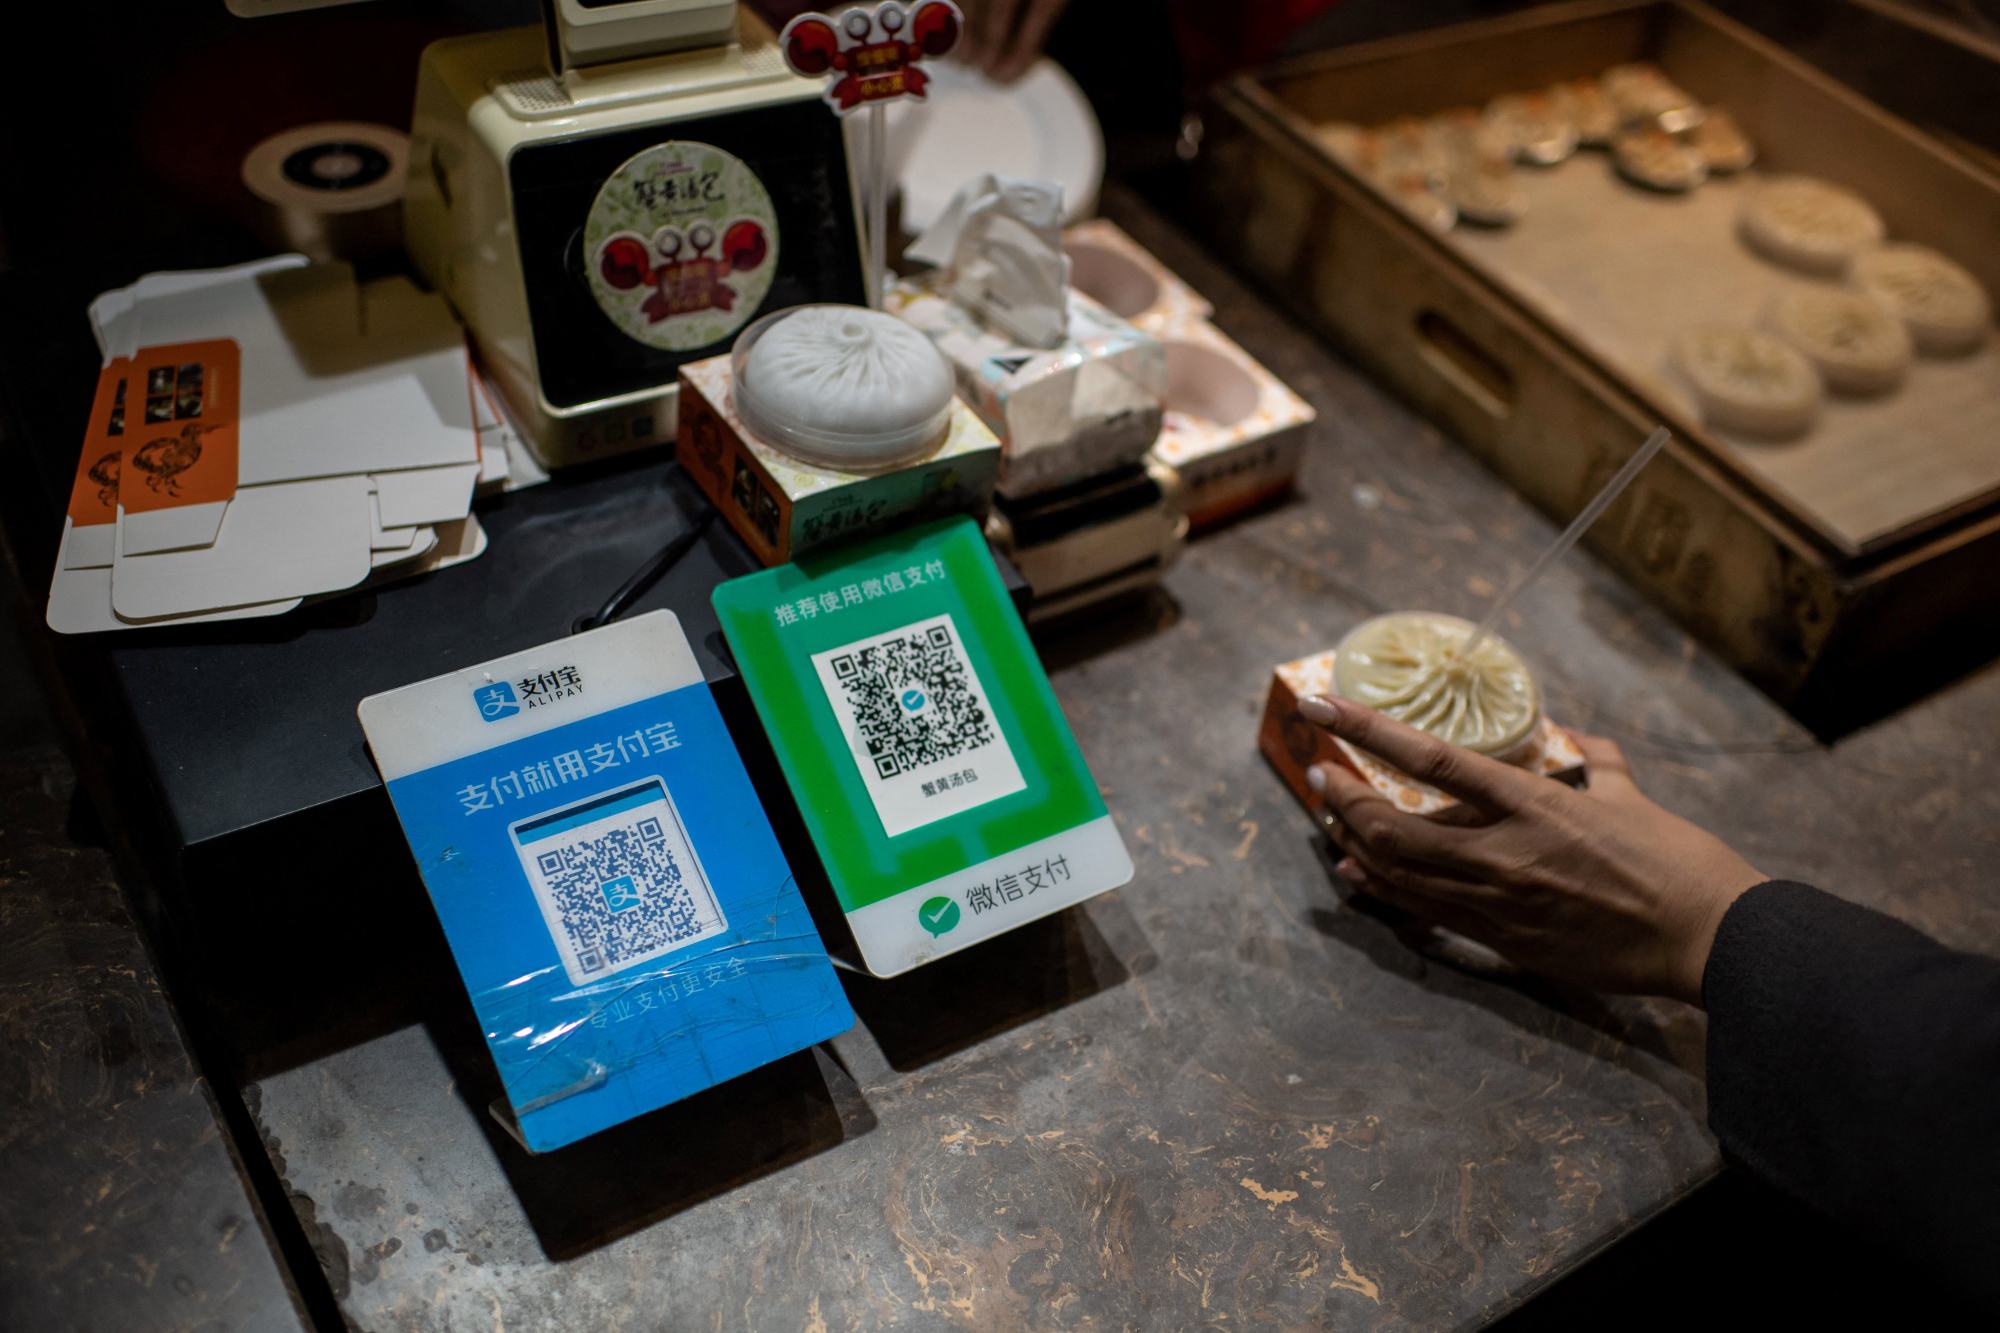 china sends message it wants foreign visitors to spend money, whether they pay in cash or through mobile payment apps